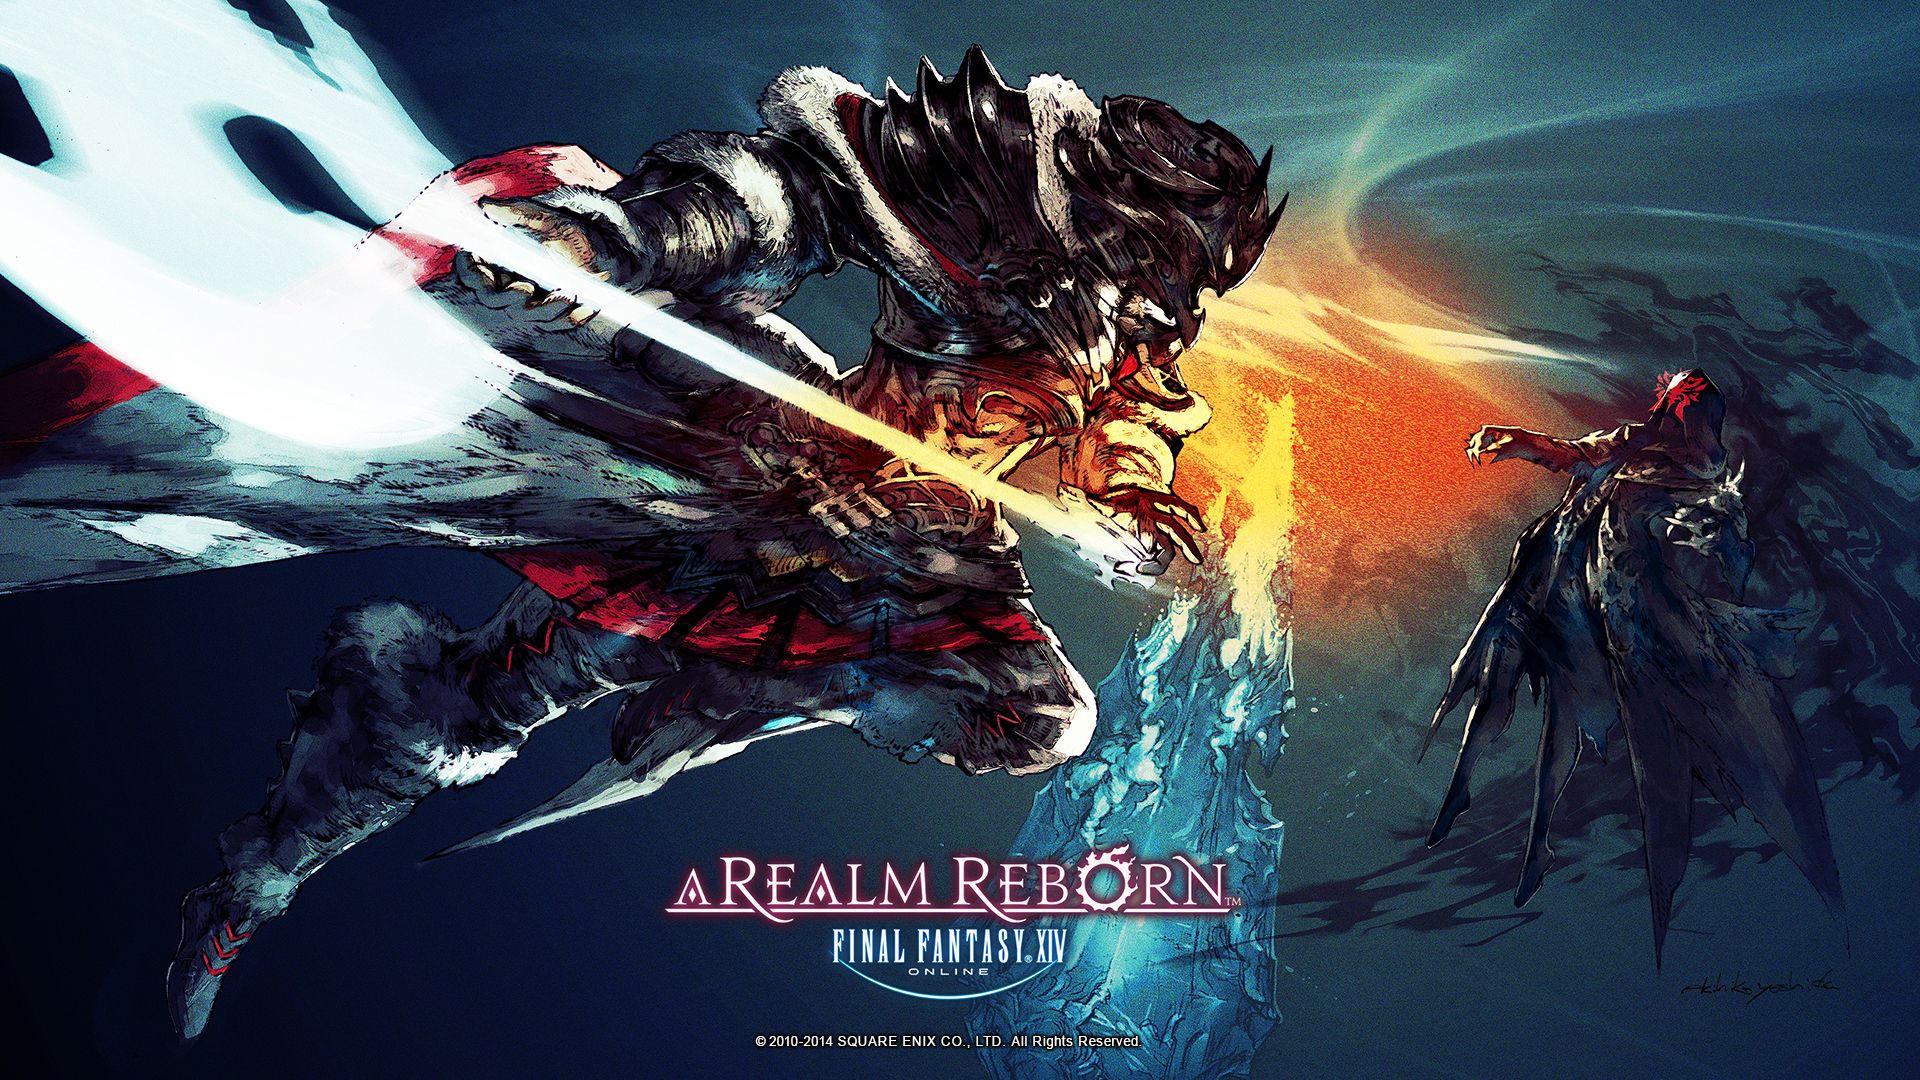 Final Fantasy XIV PS4 Open Beta Times and Servers Announced